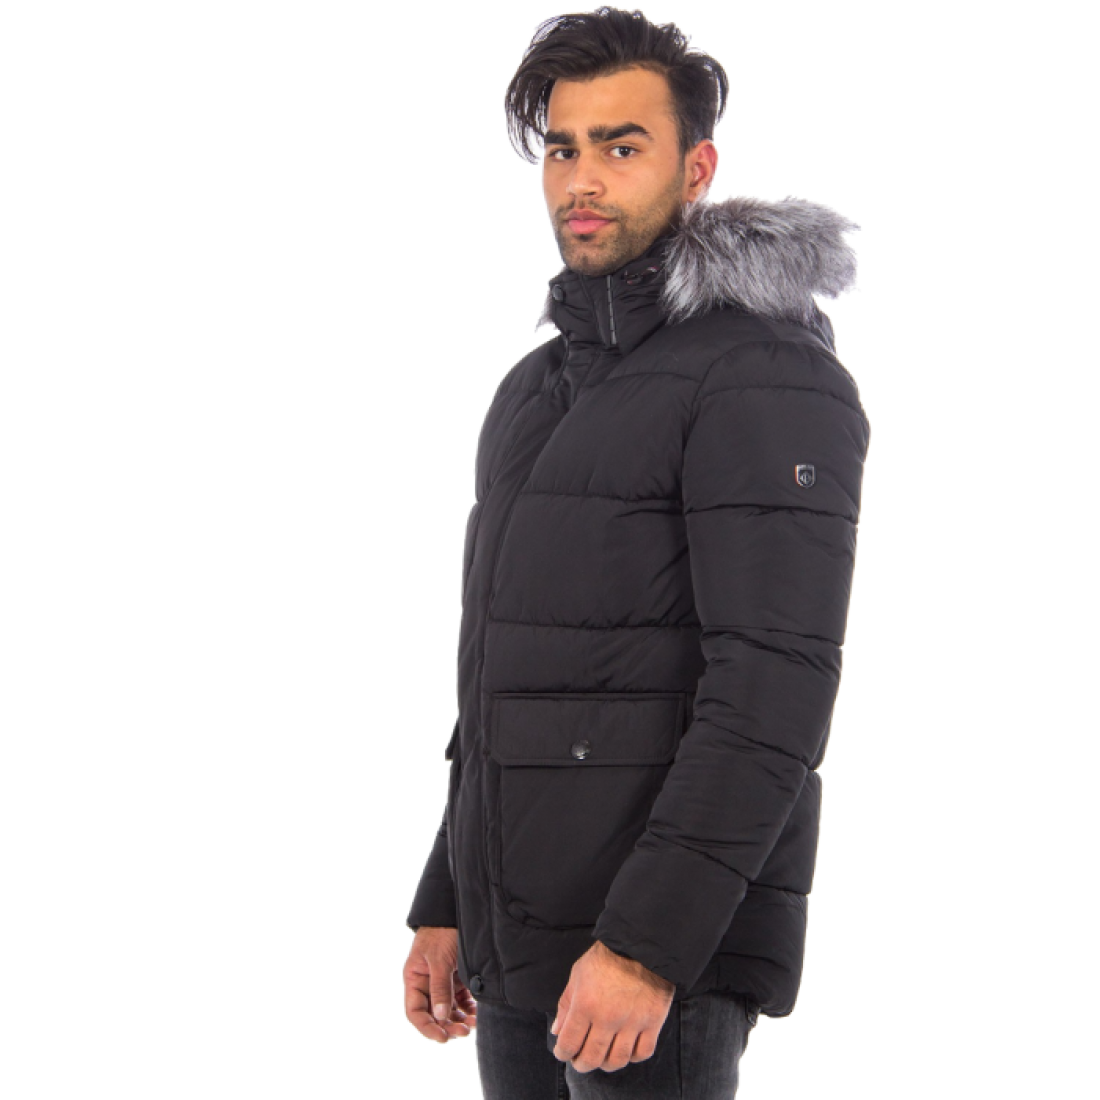 Eco Down Jacket by Point Zero on sale sale & clearance | sale at ...